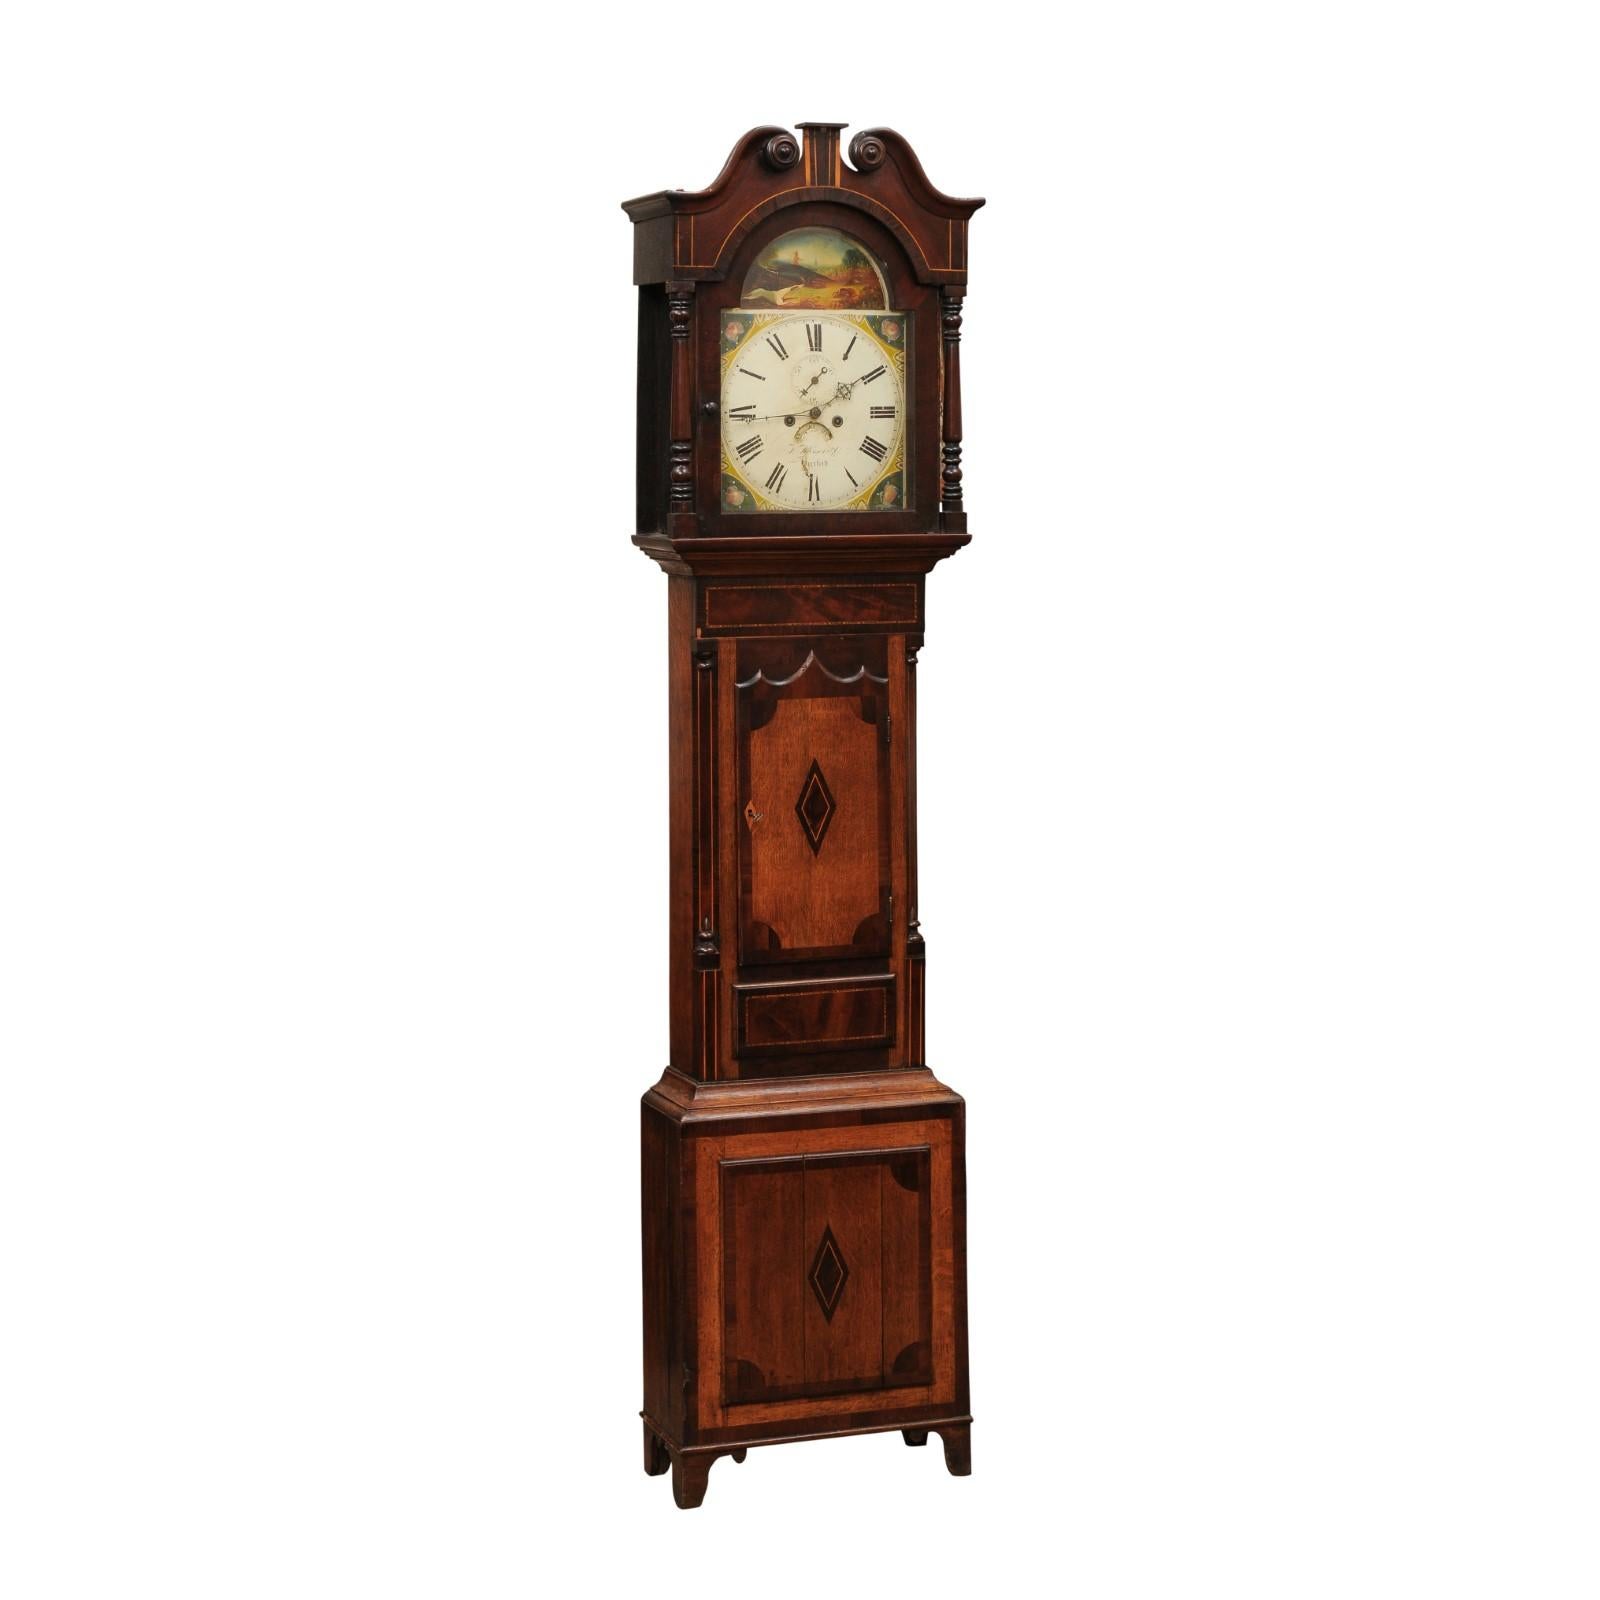 19th Century English Tallcase Clock in Oak & Mahogany with Inlay, Swan Neck Pediment & Painted Face